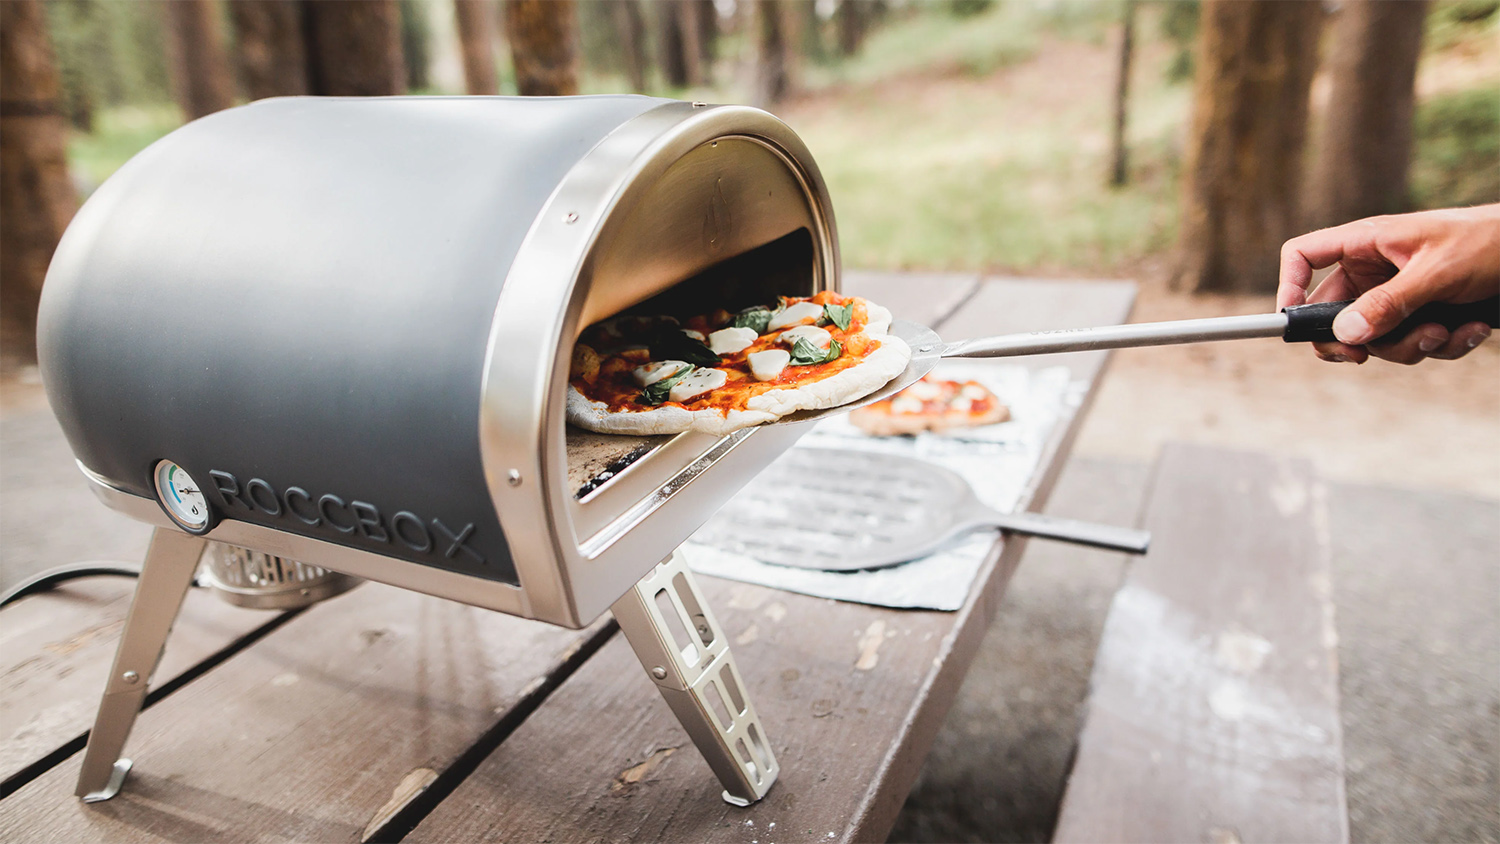 gozney roccbox pizza oven for your backyard and camping table top with pizza